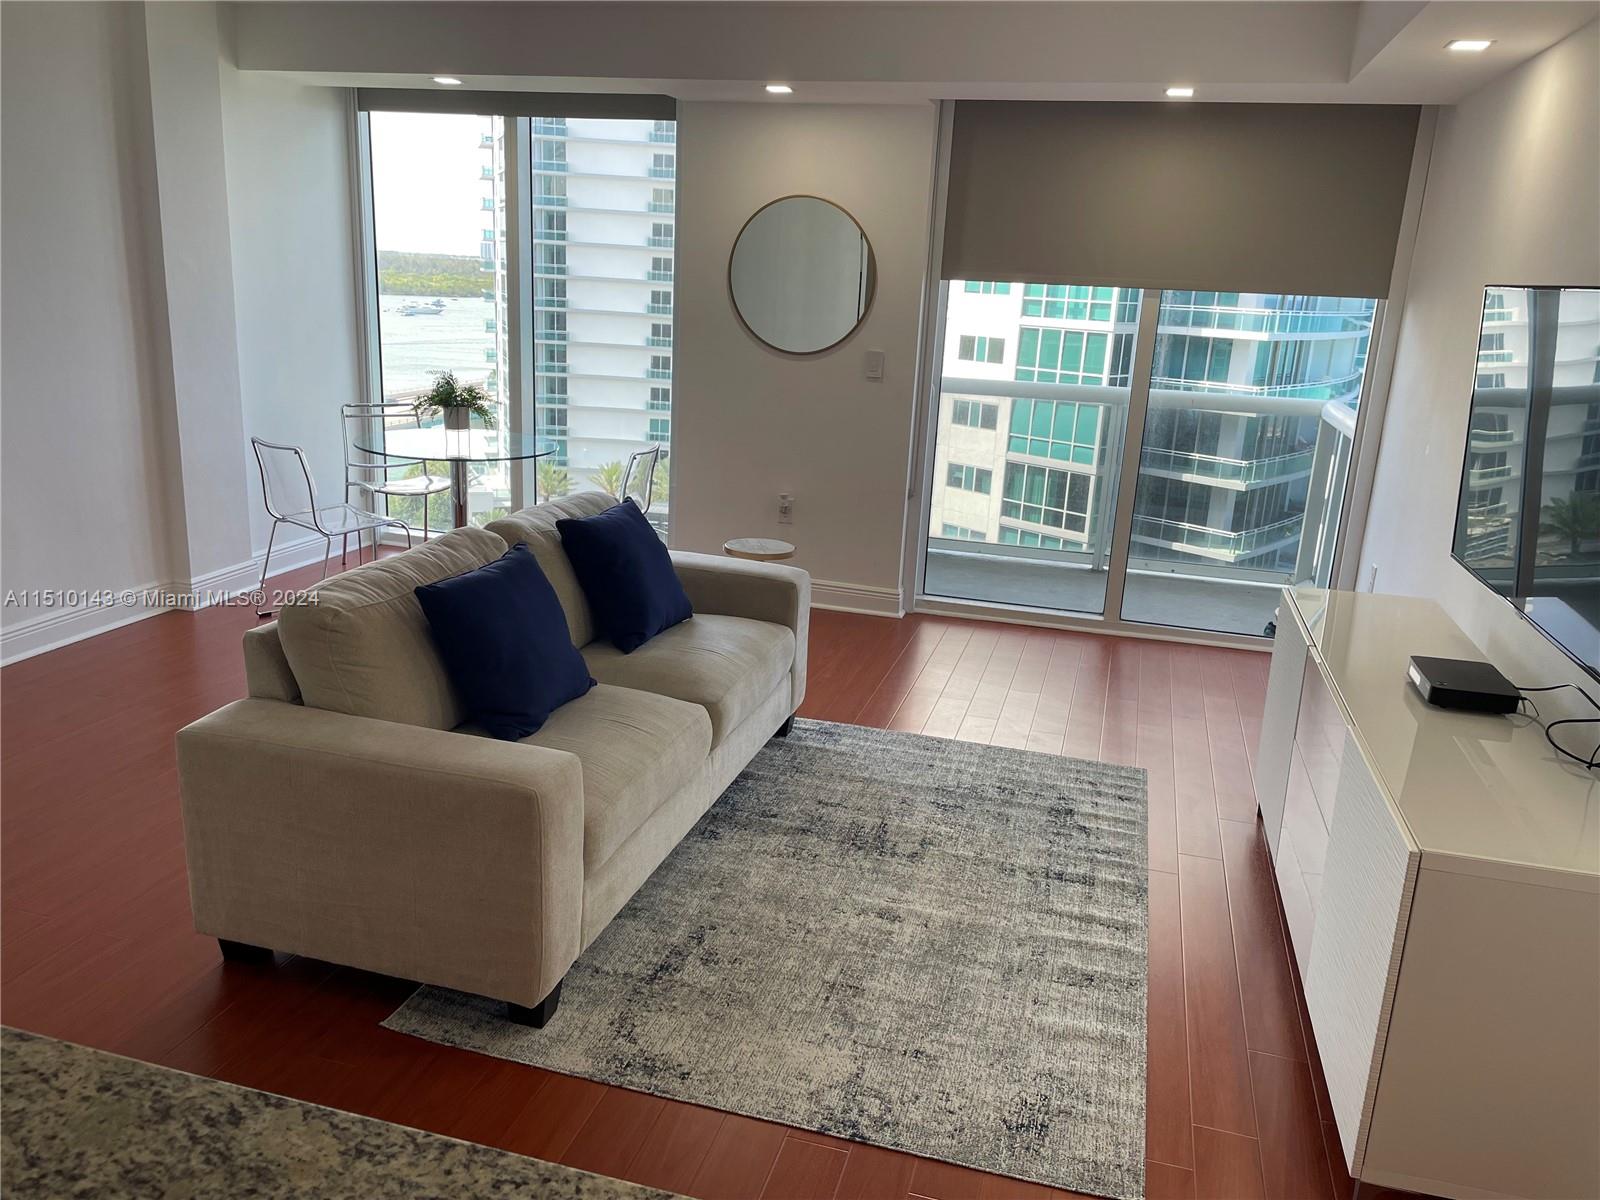 Beautiful partially furnished Studio at HARBOUR HOUSE.  This is the best line of the Studios in HARBOUR HOUSE.  Unit has a big kitchen, Murphy Bed, Washer Dryer Combo and Walk in Closet.